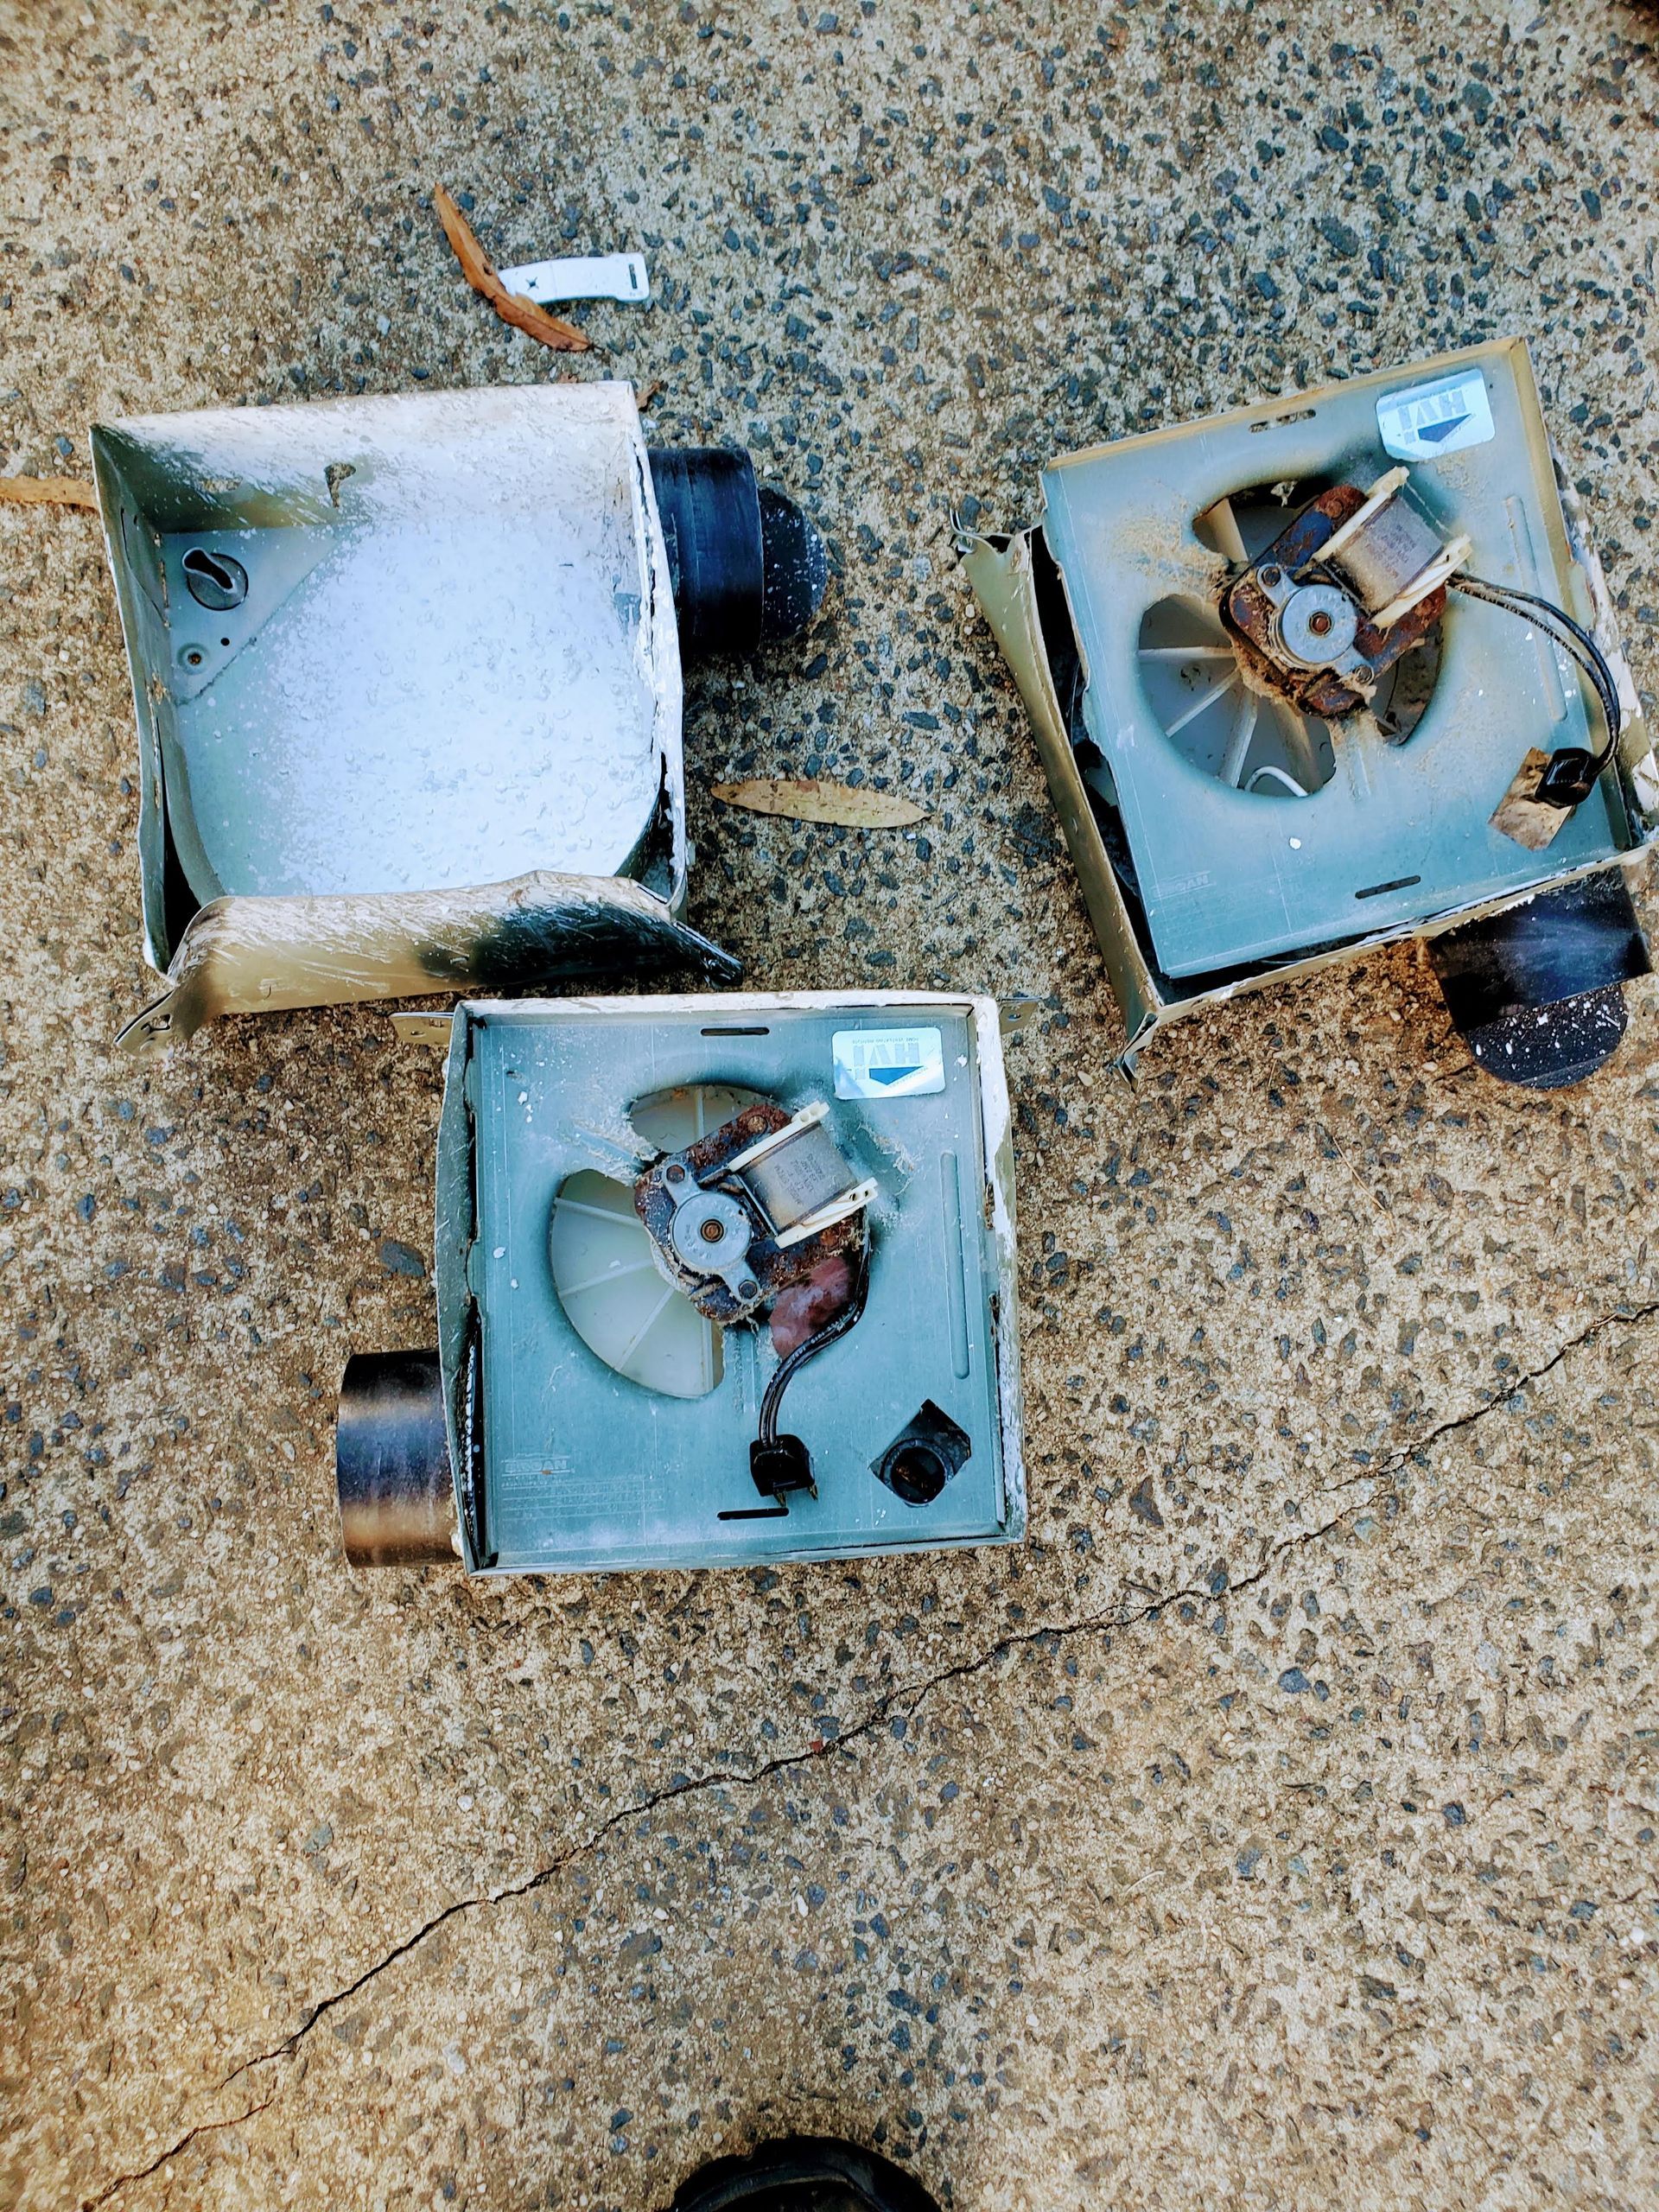 Three pieces of electrical equipment are laying on the ground